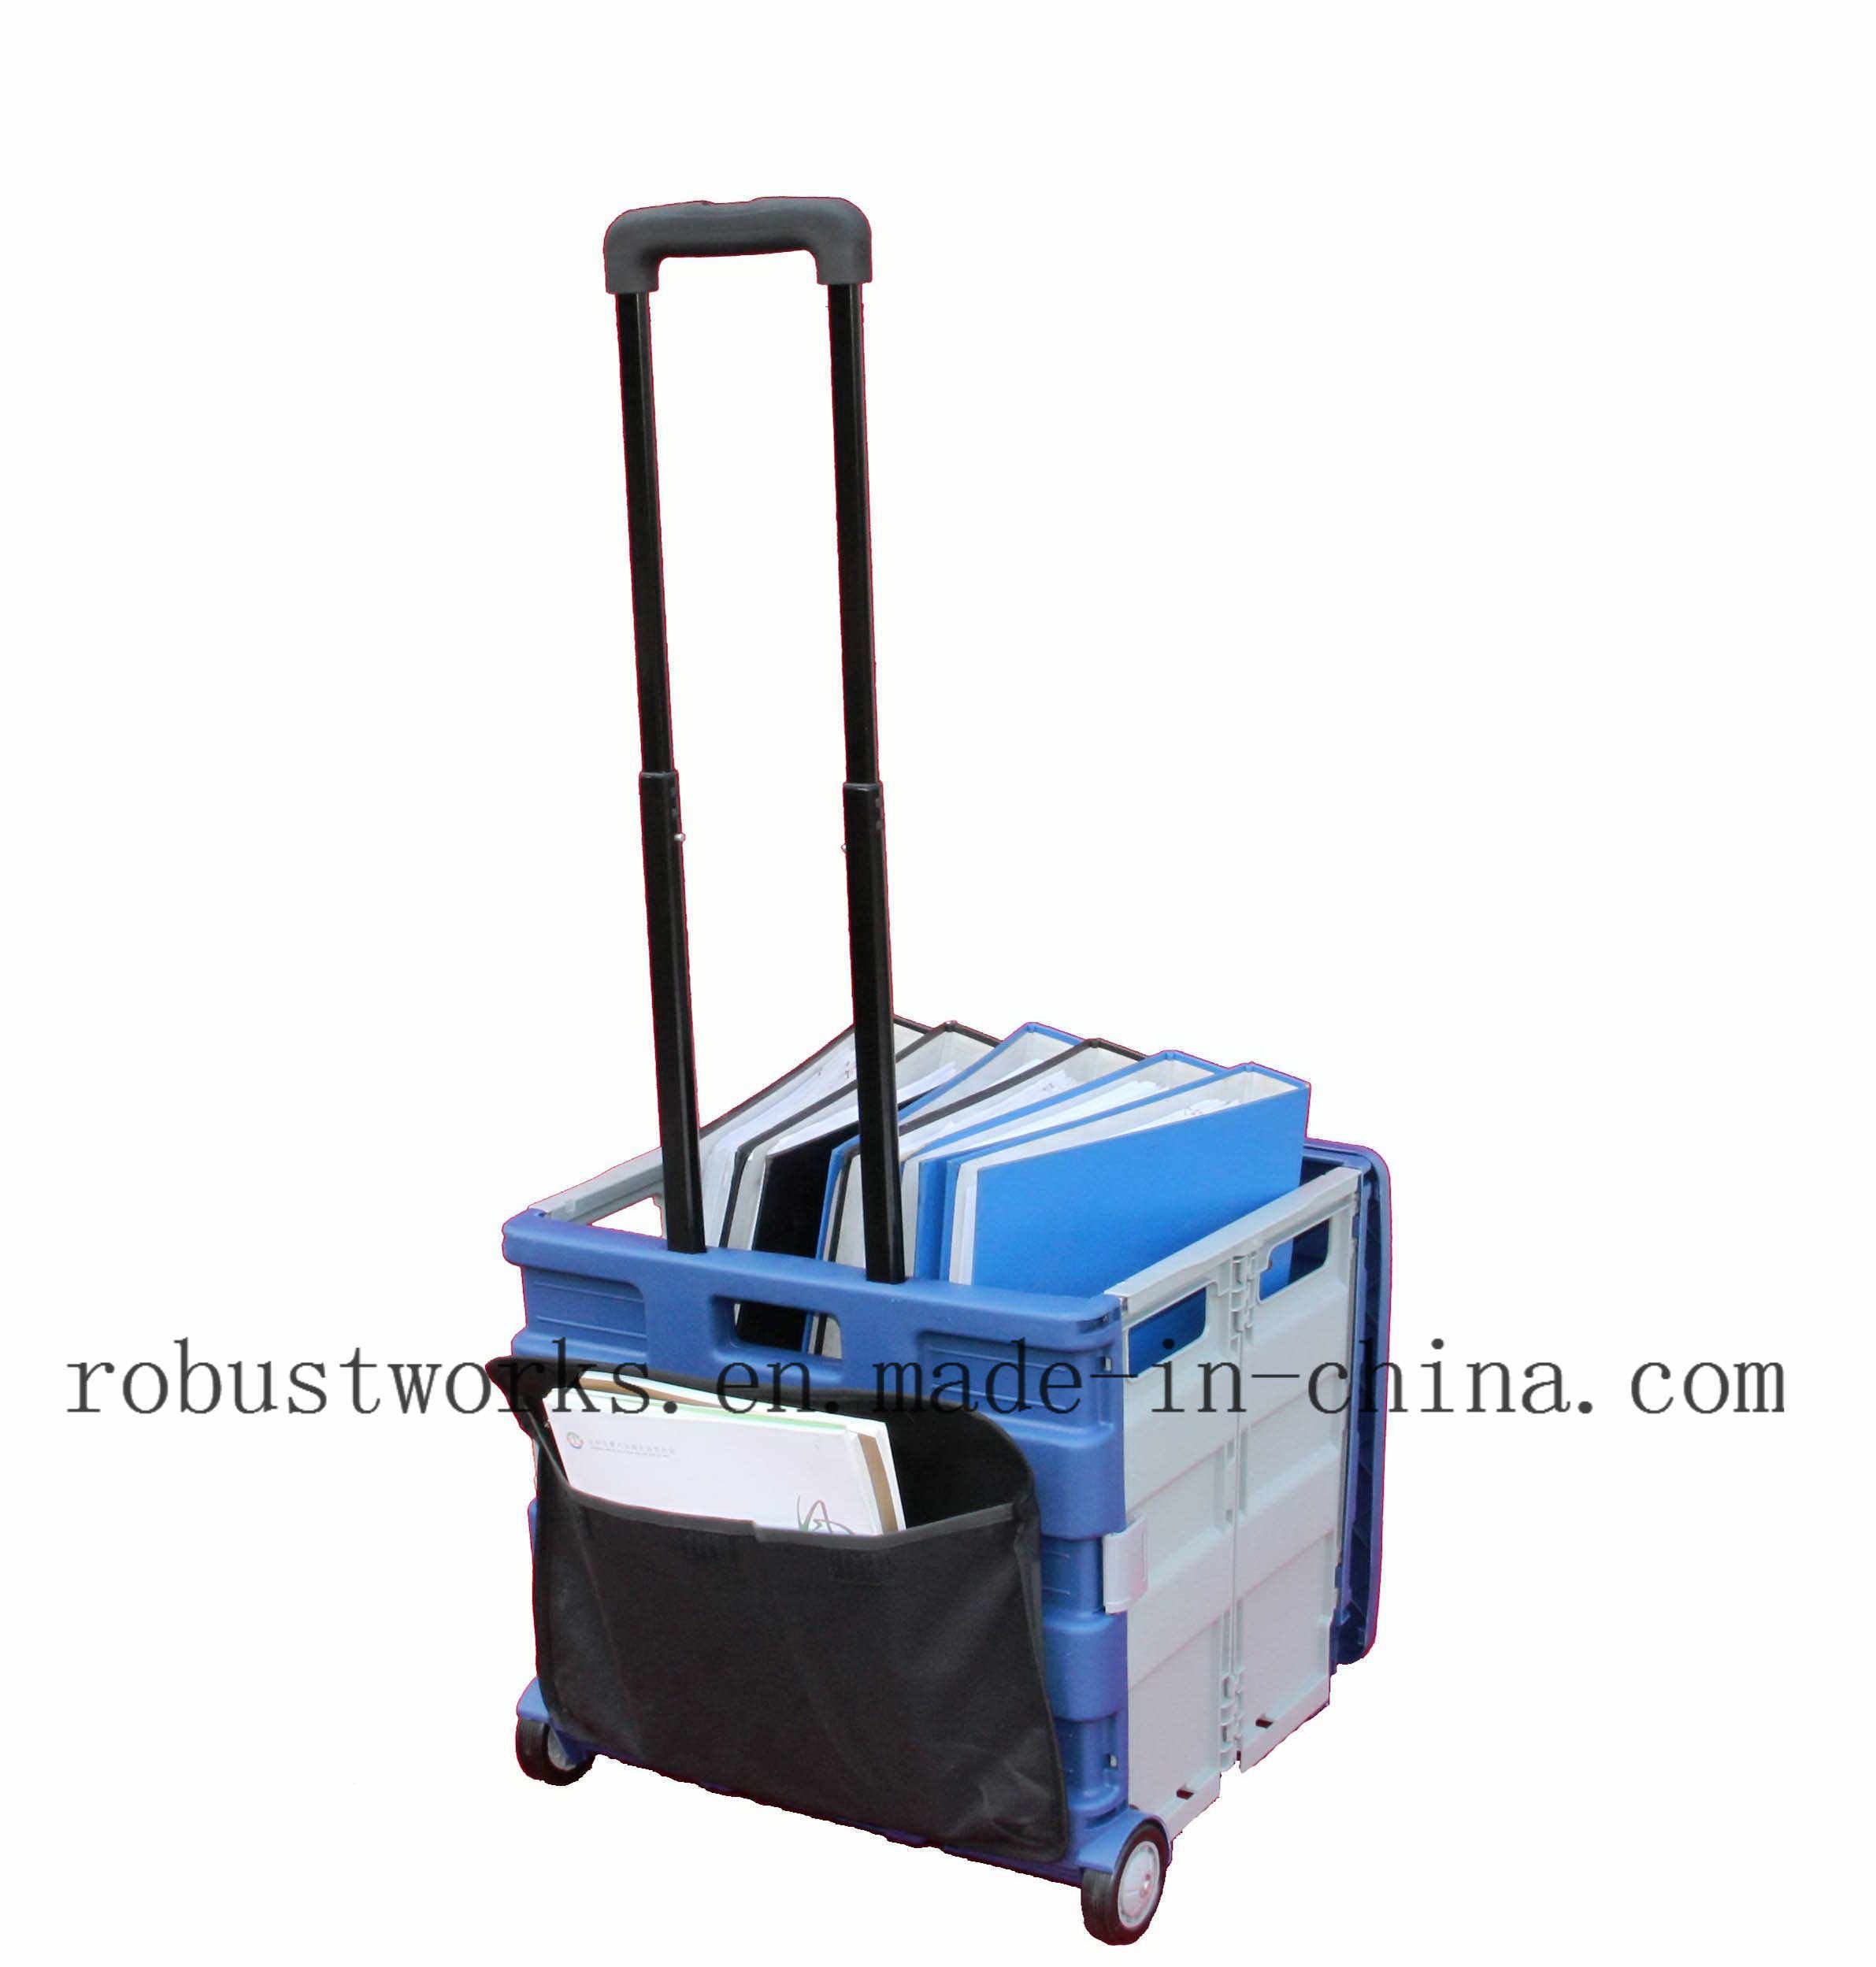 Large Folding Cart with Canvas Pouch and Top Cover (FC406LP)